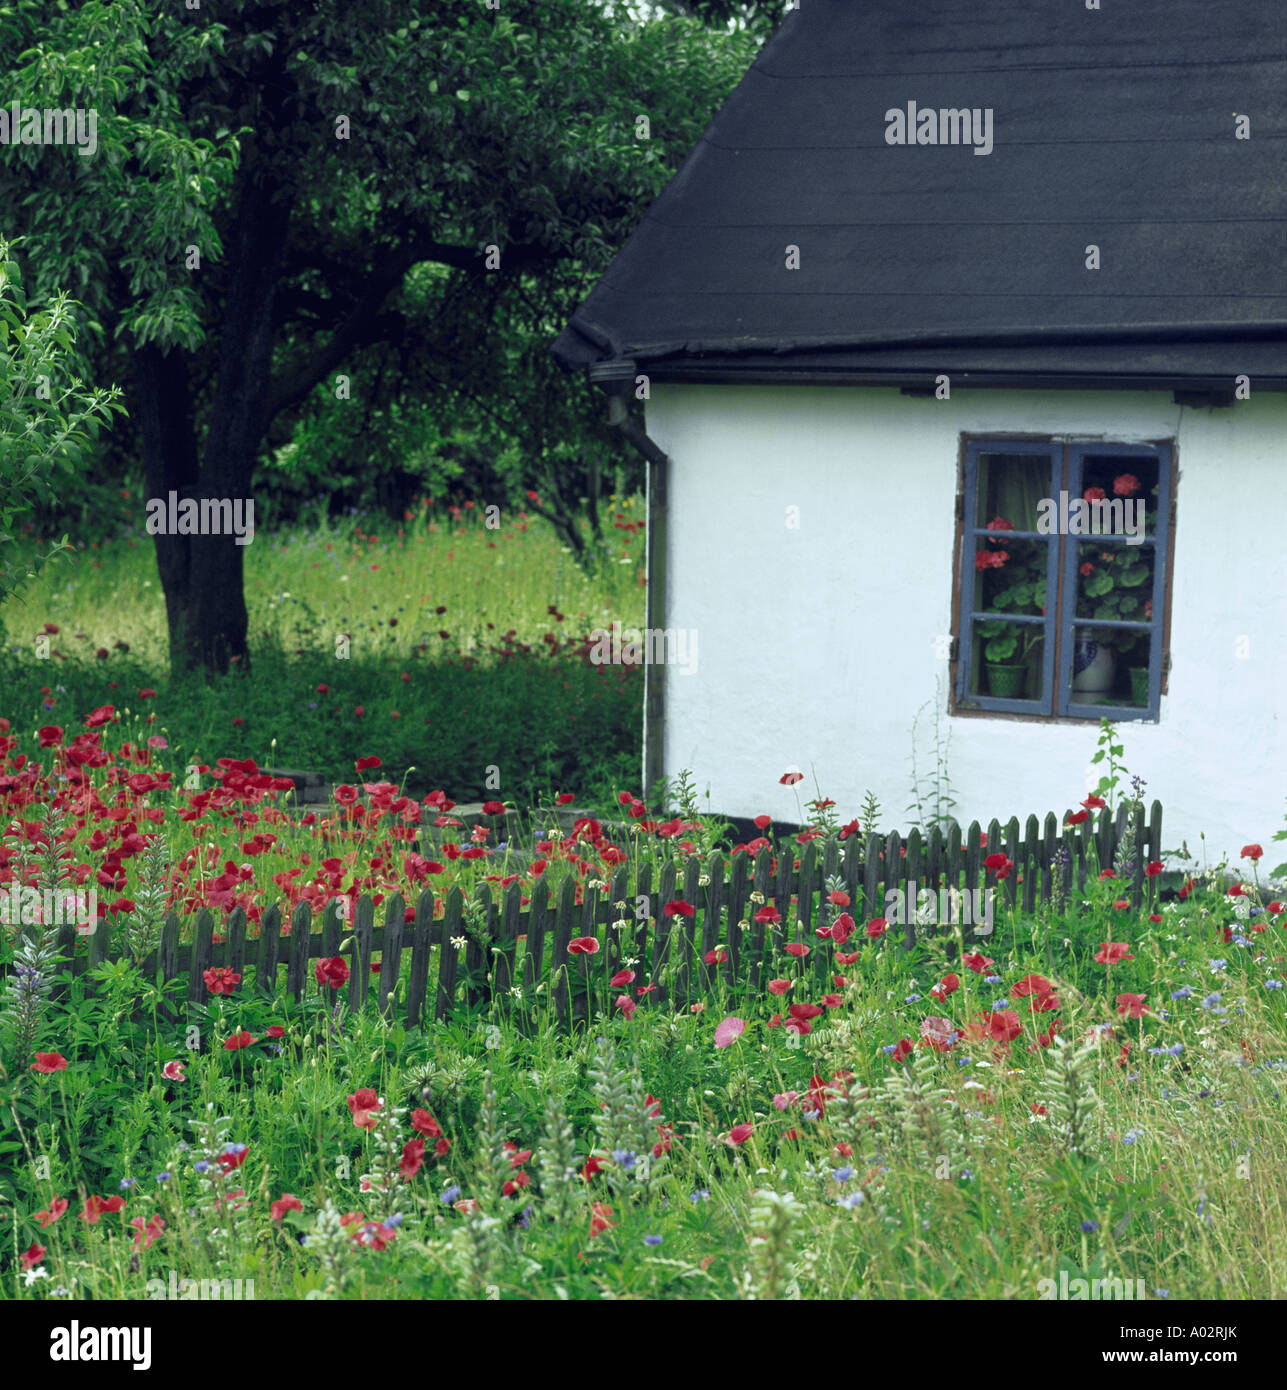 Red poppies and low rustic wooden fence in wild country garden of small white Swedish cottage Stock Photo